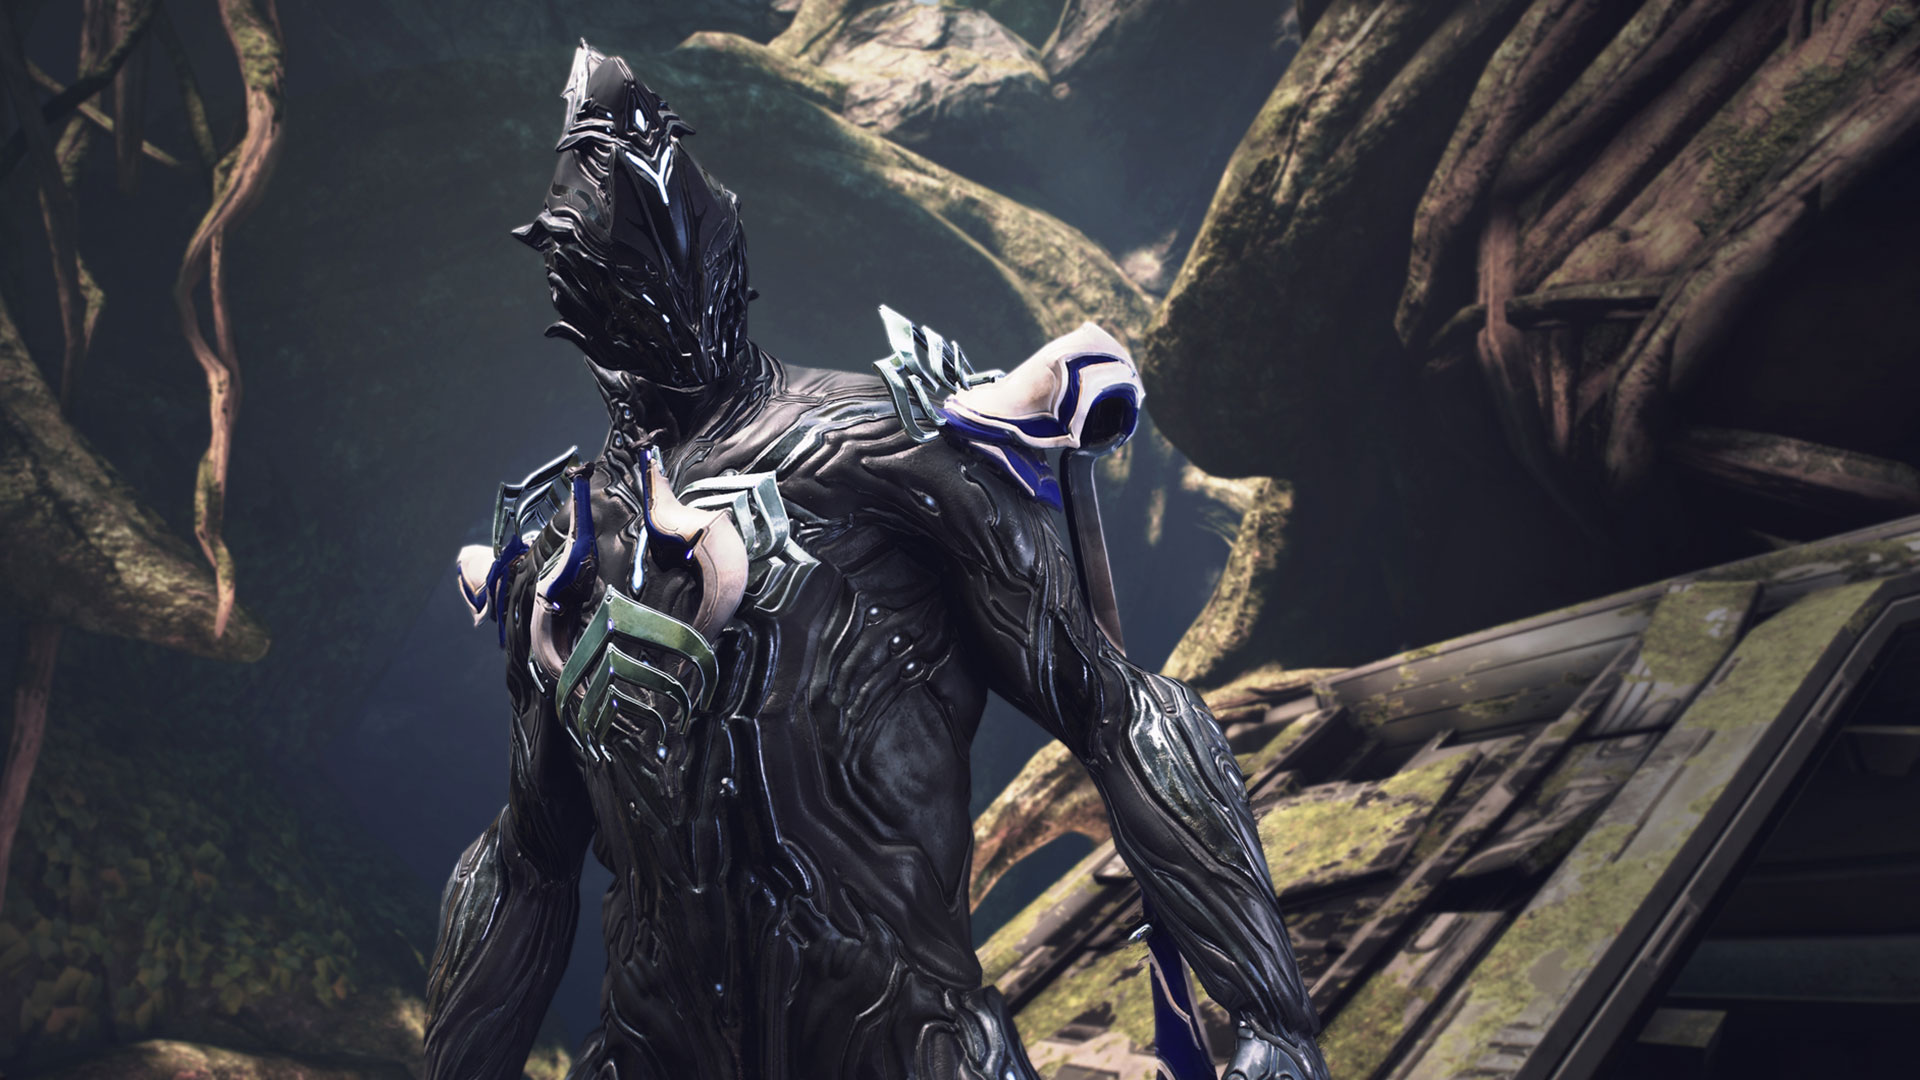 Warframe's The Deadlock Protocol update is live on Xbox One, PS4 and Switch